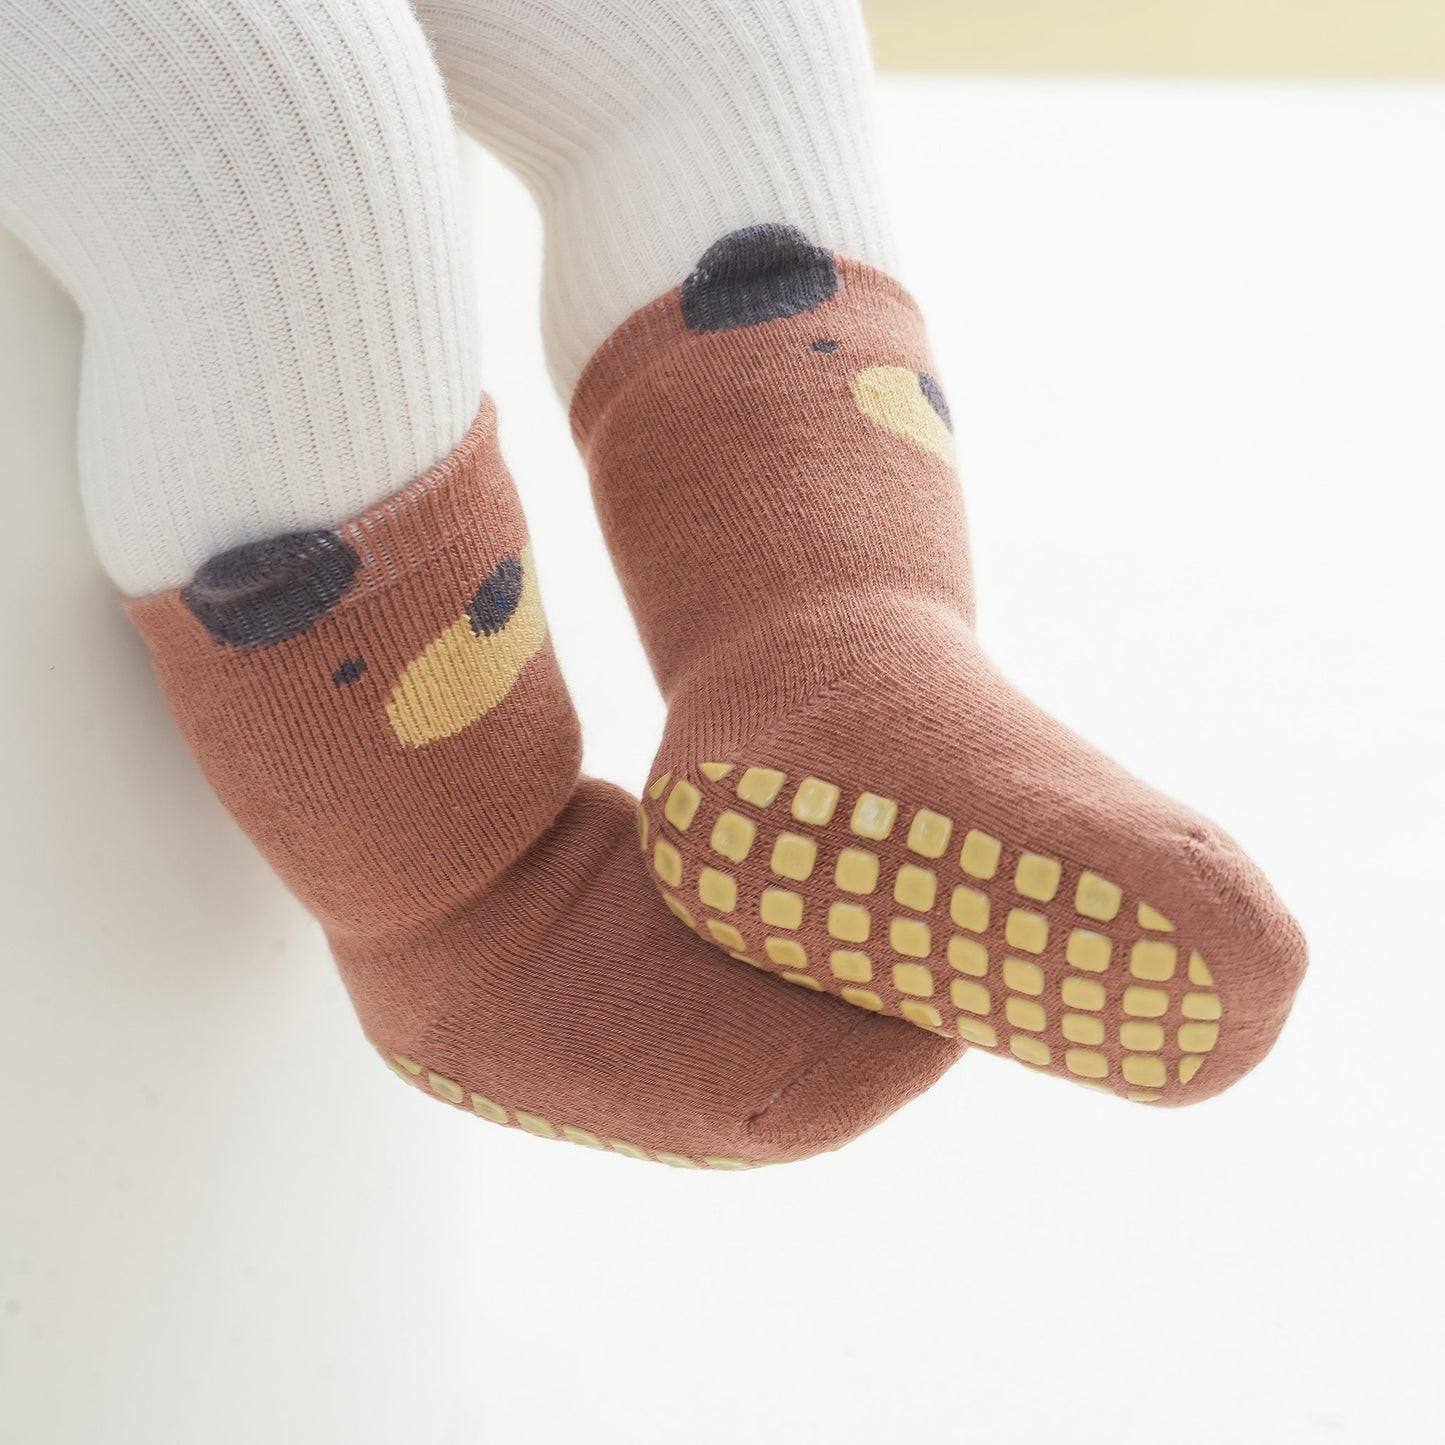 New- Who Am I - Extra Warm - 4 Pairs of Stay-On Baby & Toddler Non-Slip Socks